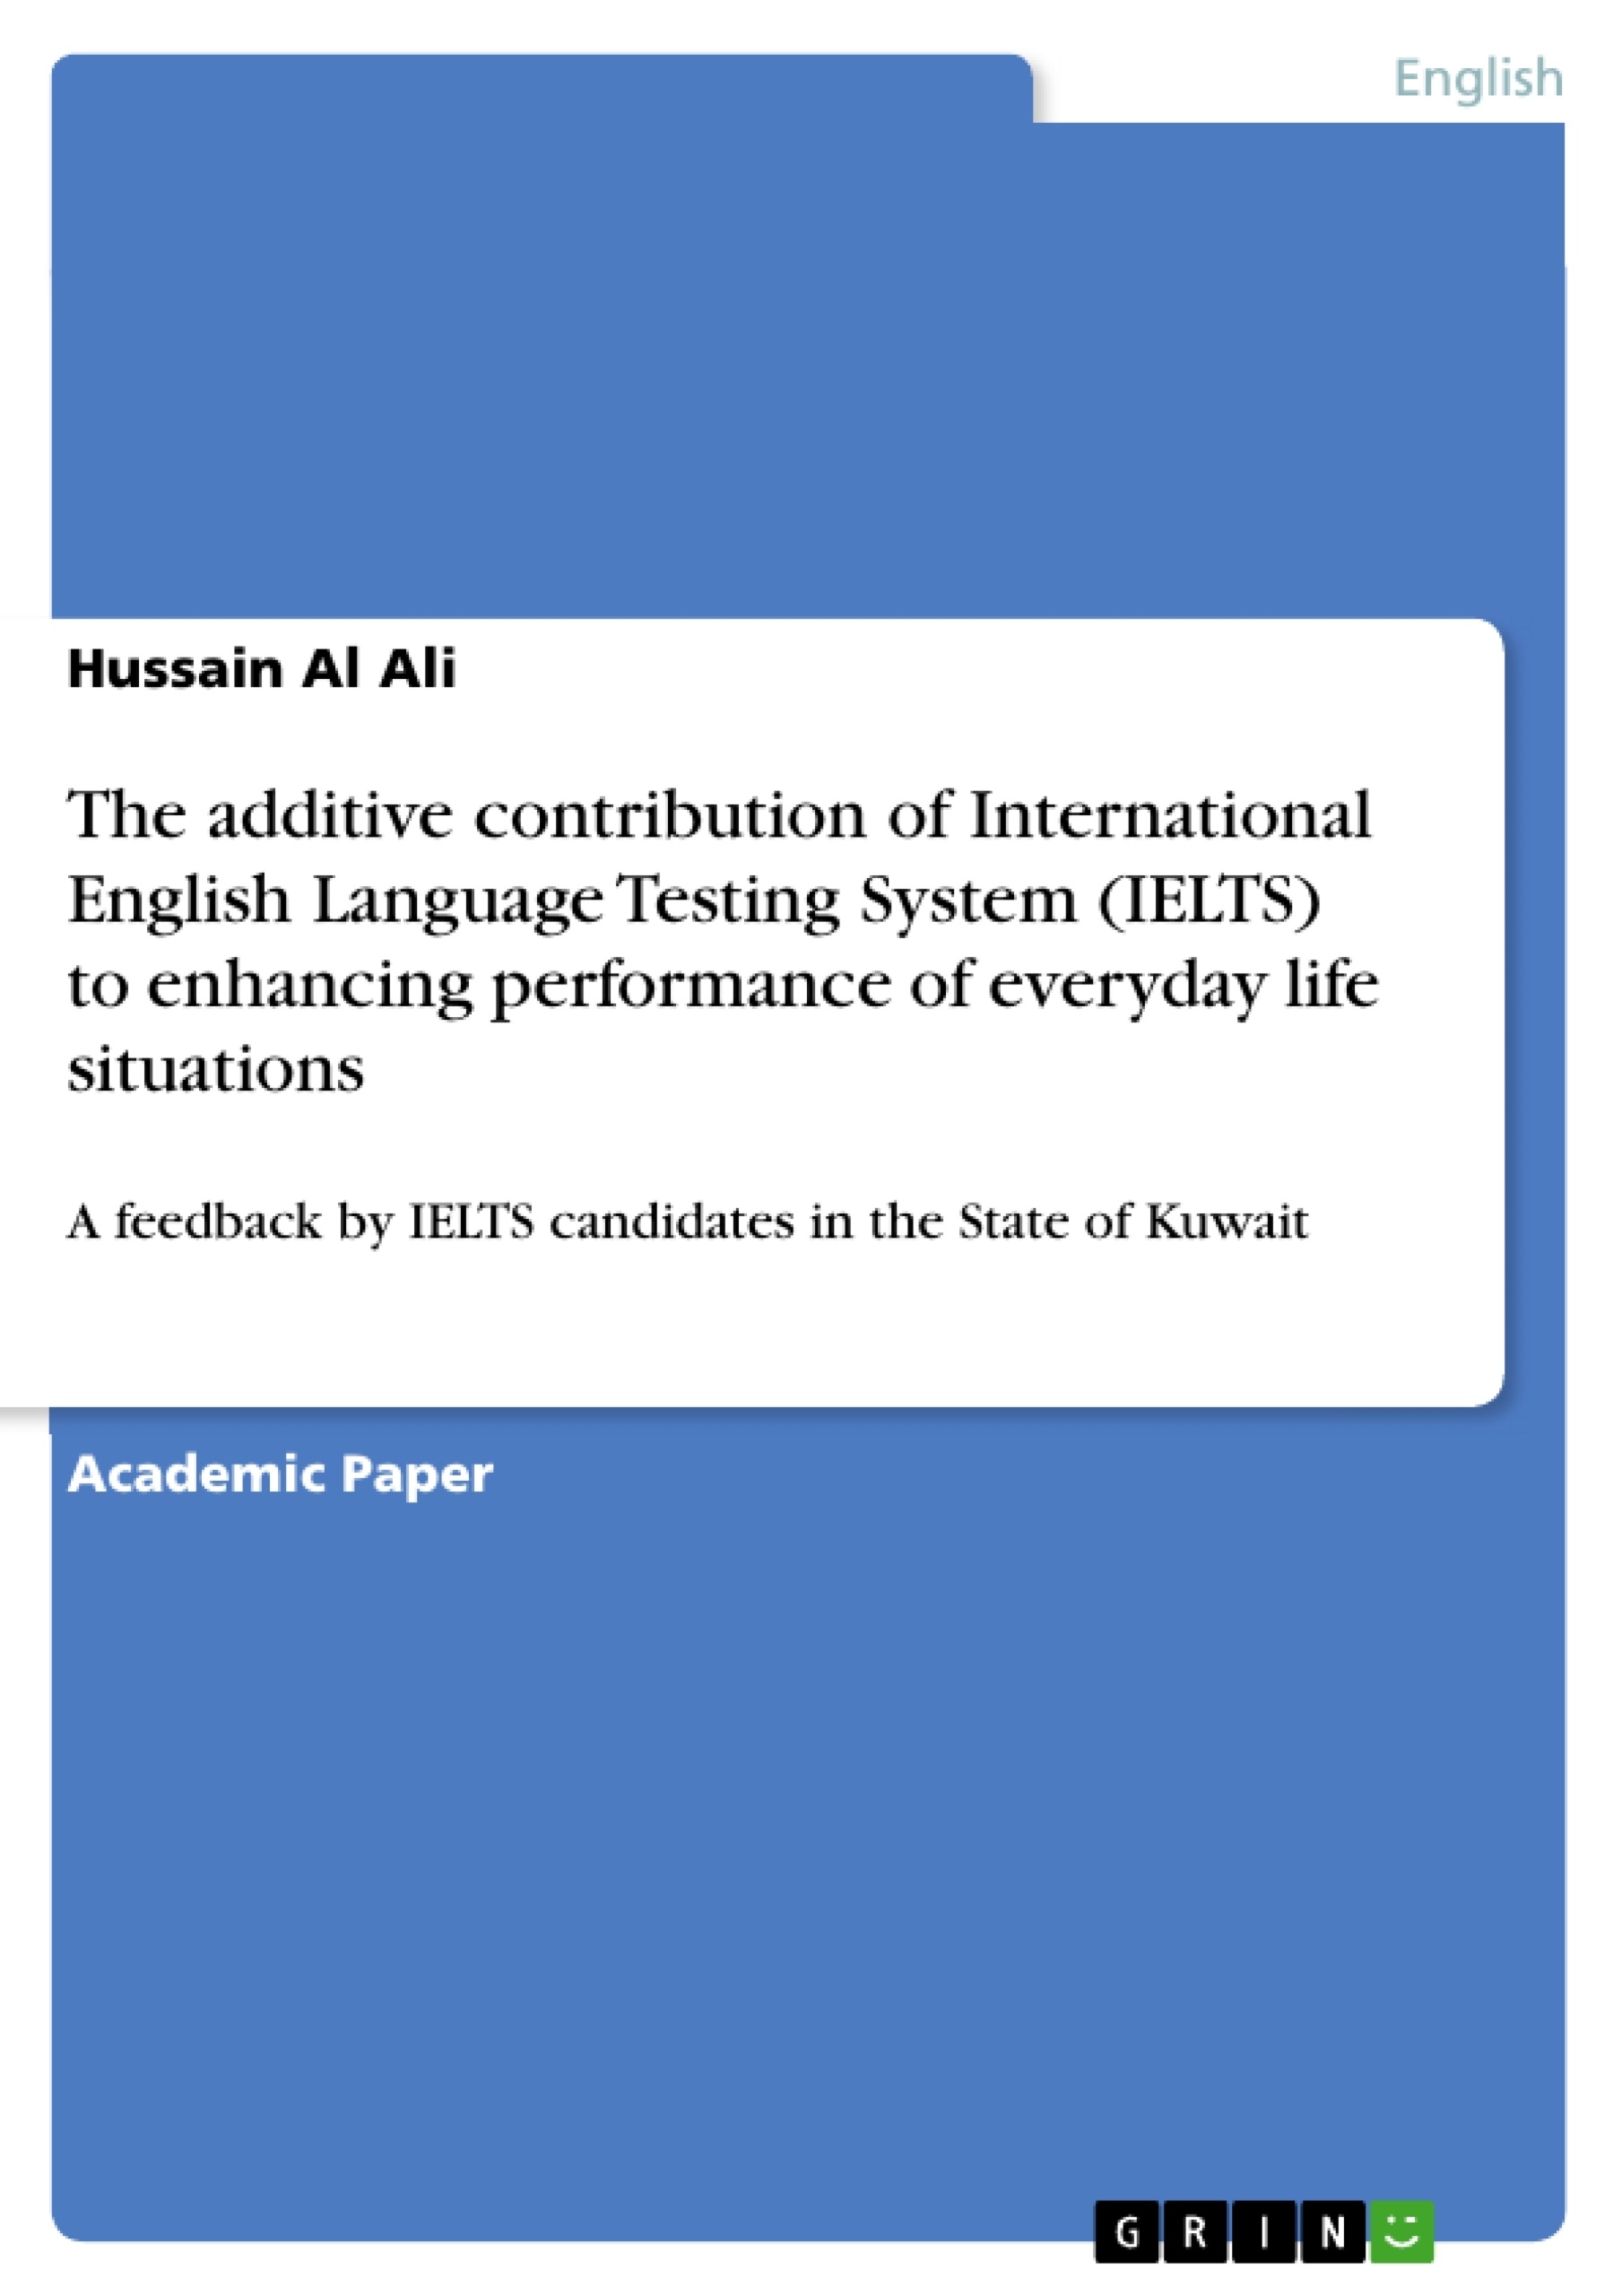 Titel: The additive contribution of International English Language Testing System (IELTS) to enhancing performance of everyday life situations